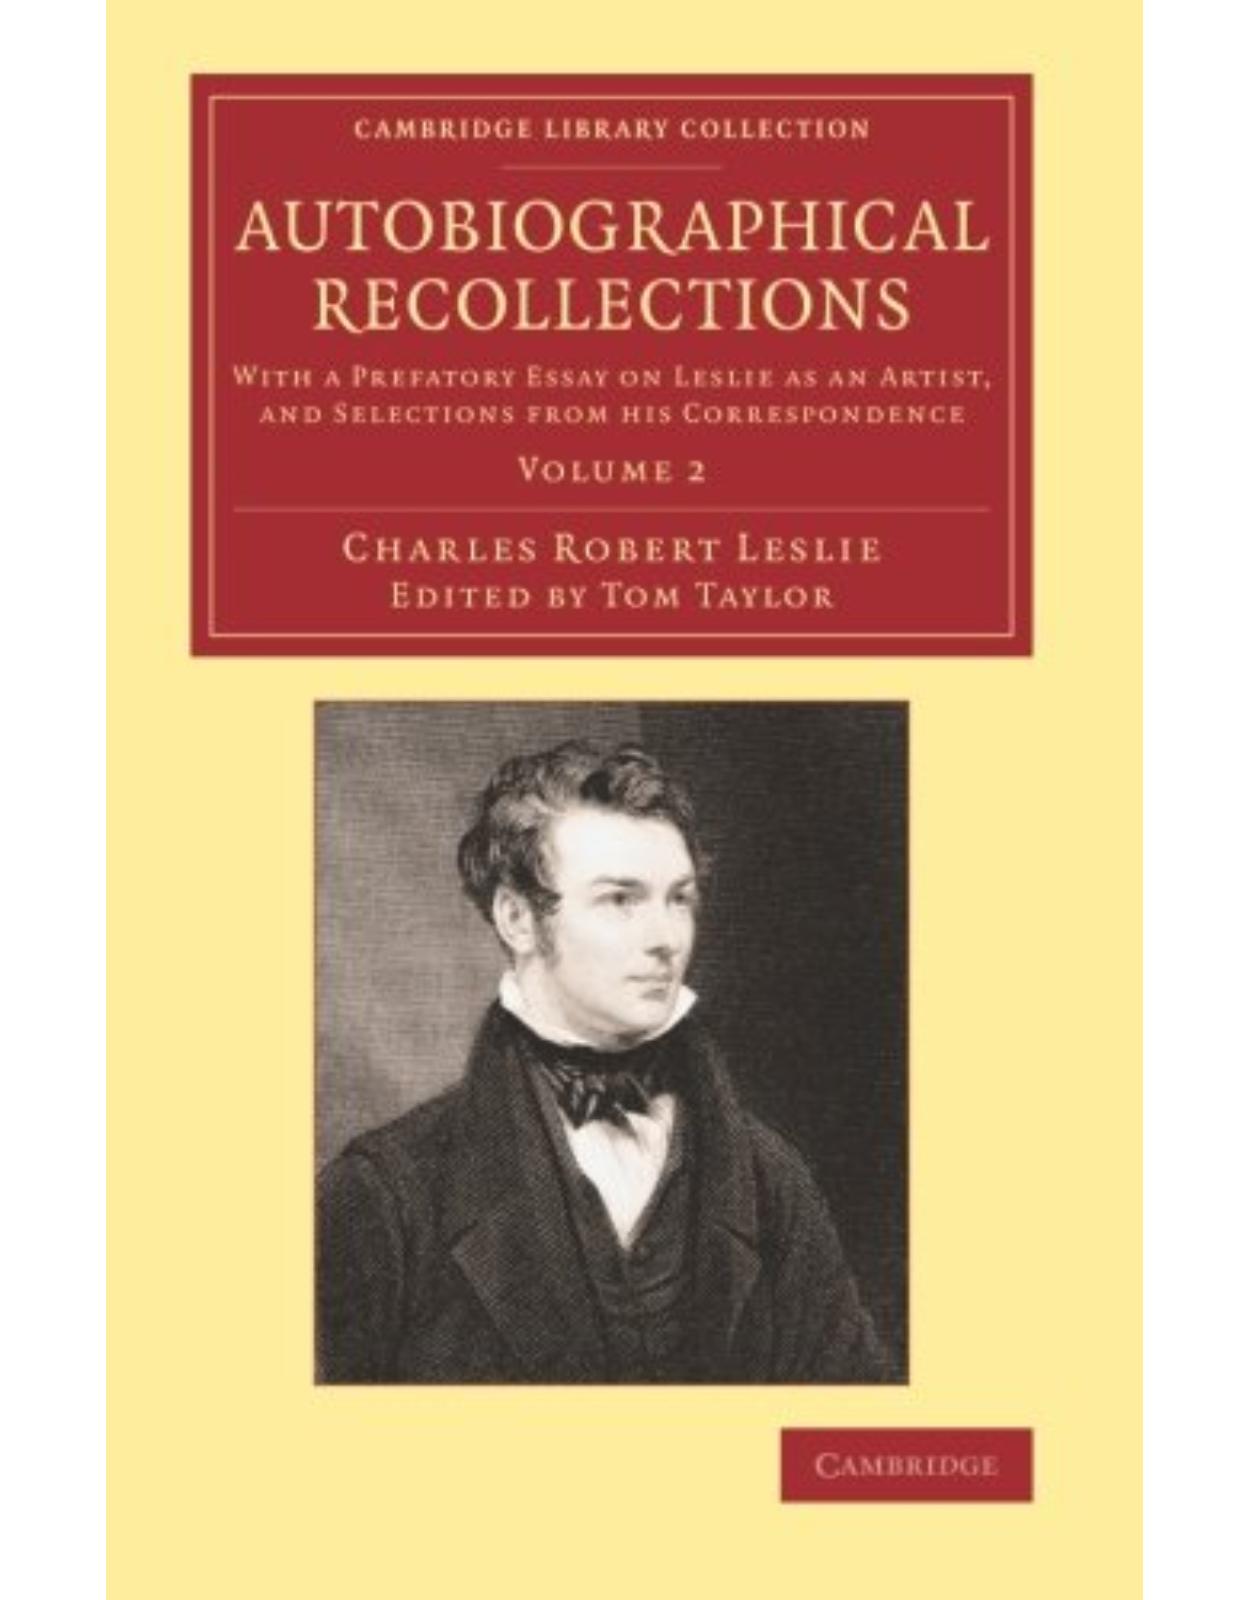 Autobiographical Recollections 2 Volume Set: With a Prefatory Essay on Leslie as an Artist, and Selections from his Correspondence